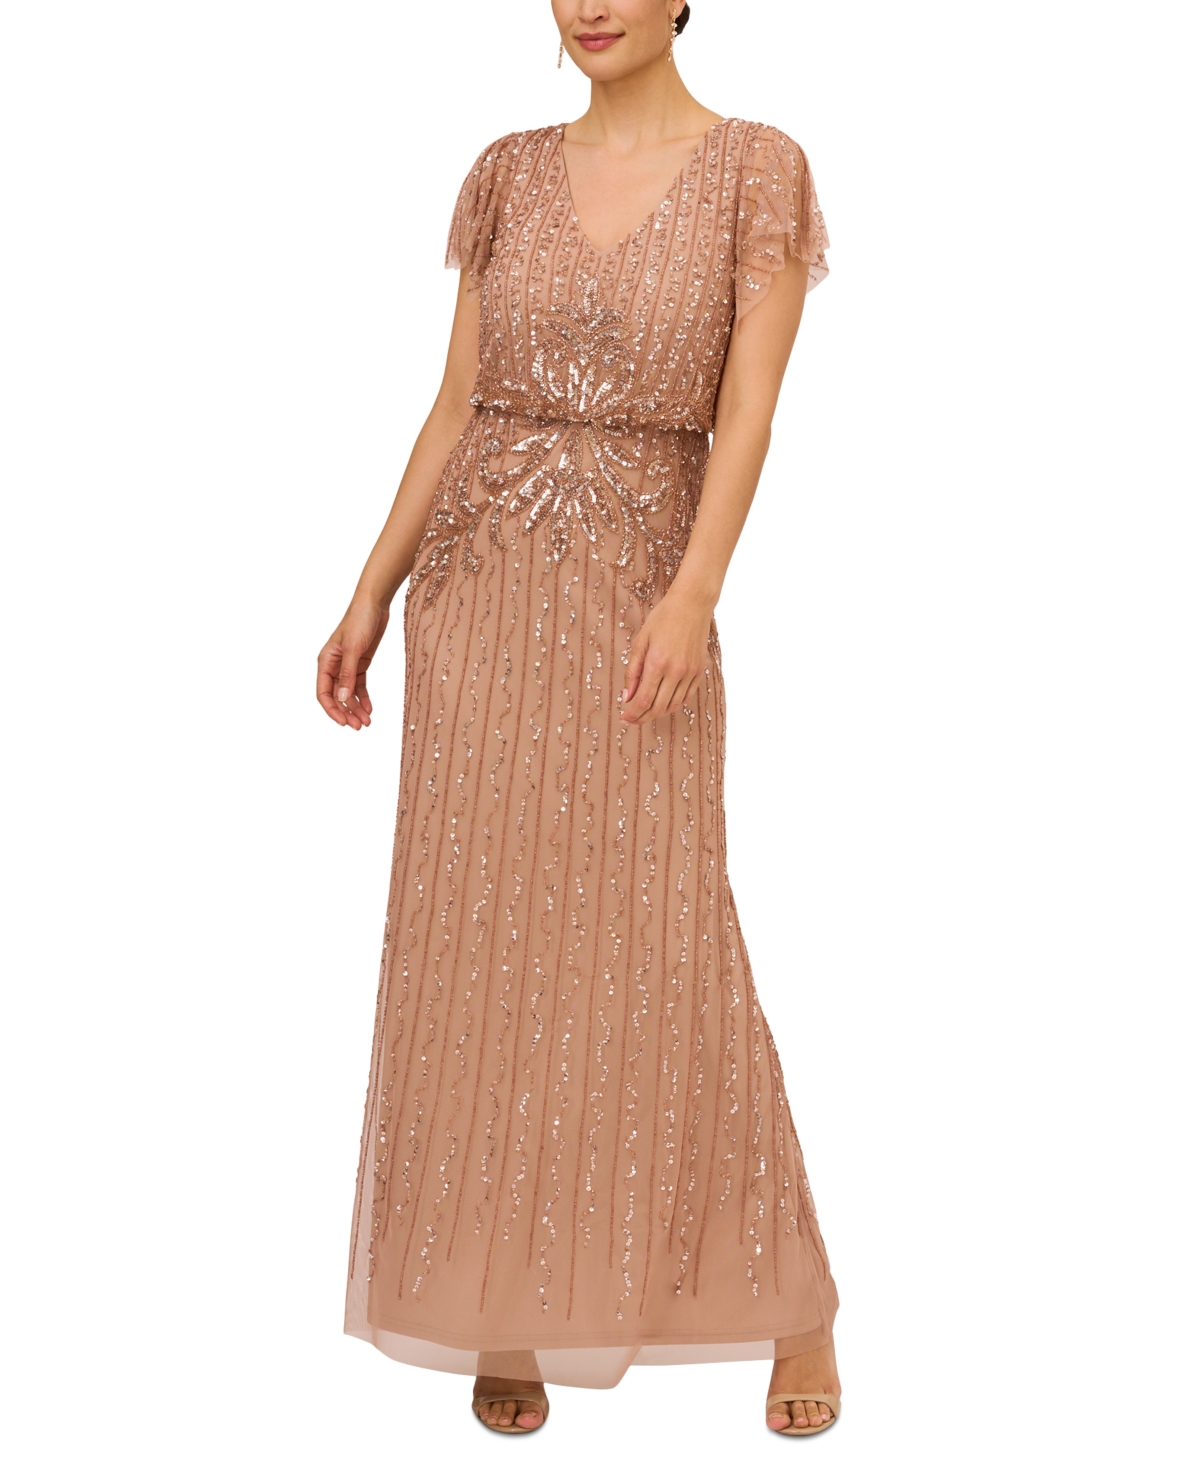 1920s Downton Abbey Dresses Adrianna Papell Womens Beaded Flutter-Sleeve Gown - Rose Gold $249.00 AT vintagedancer.com